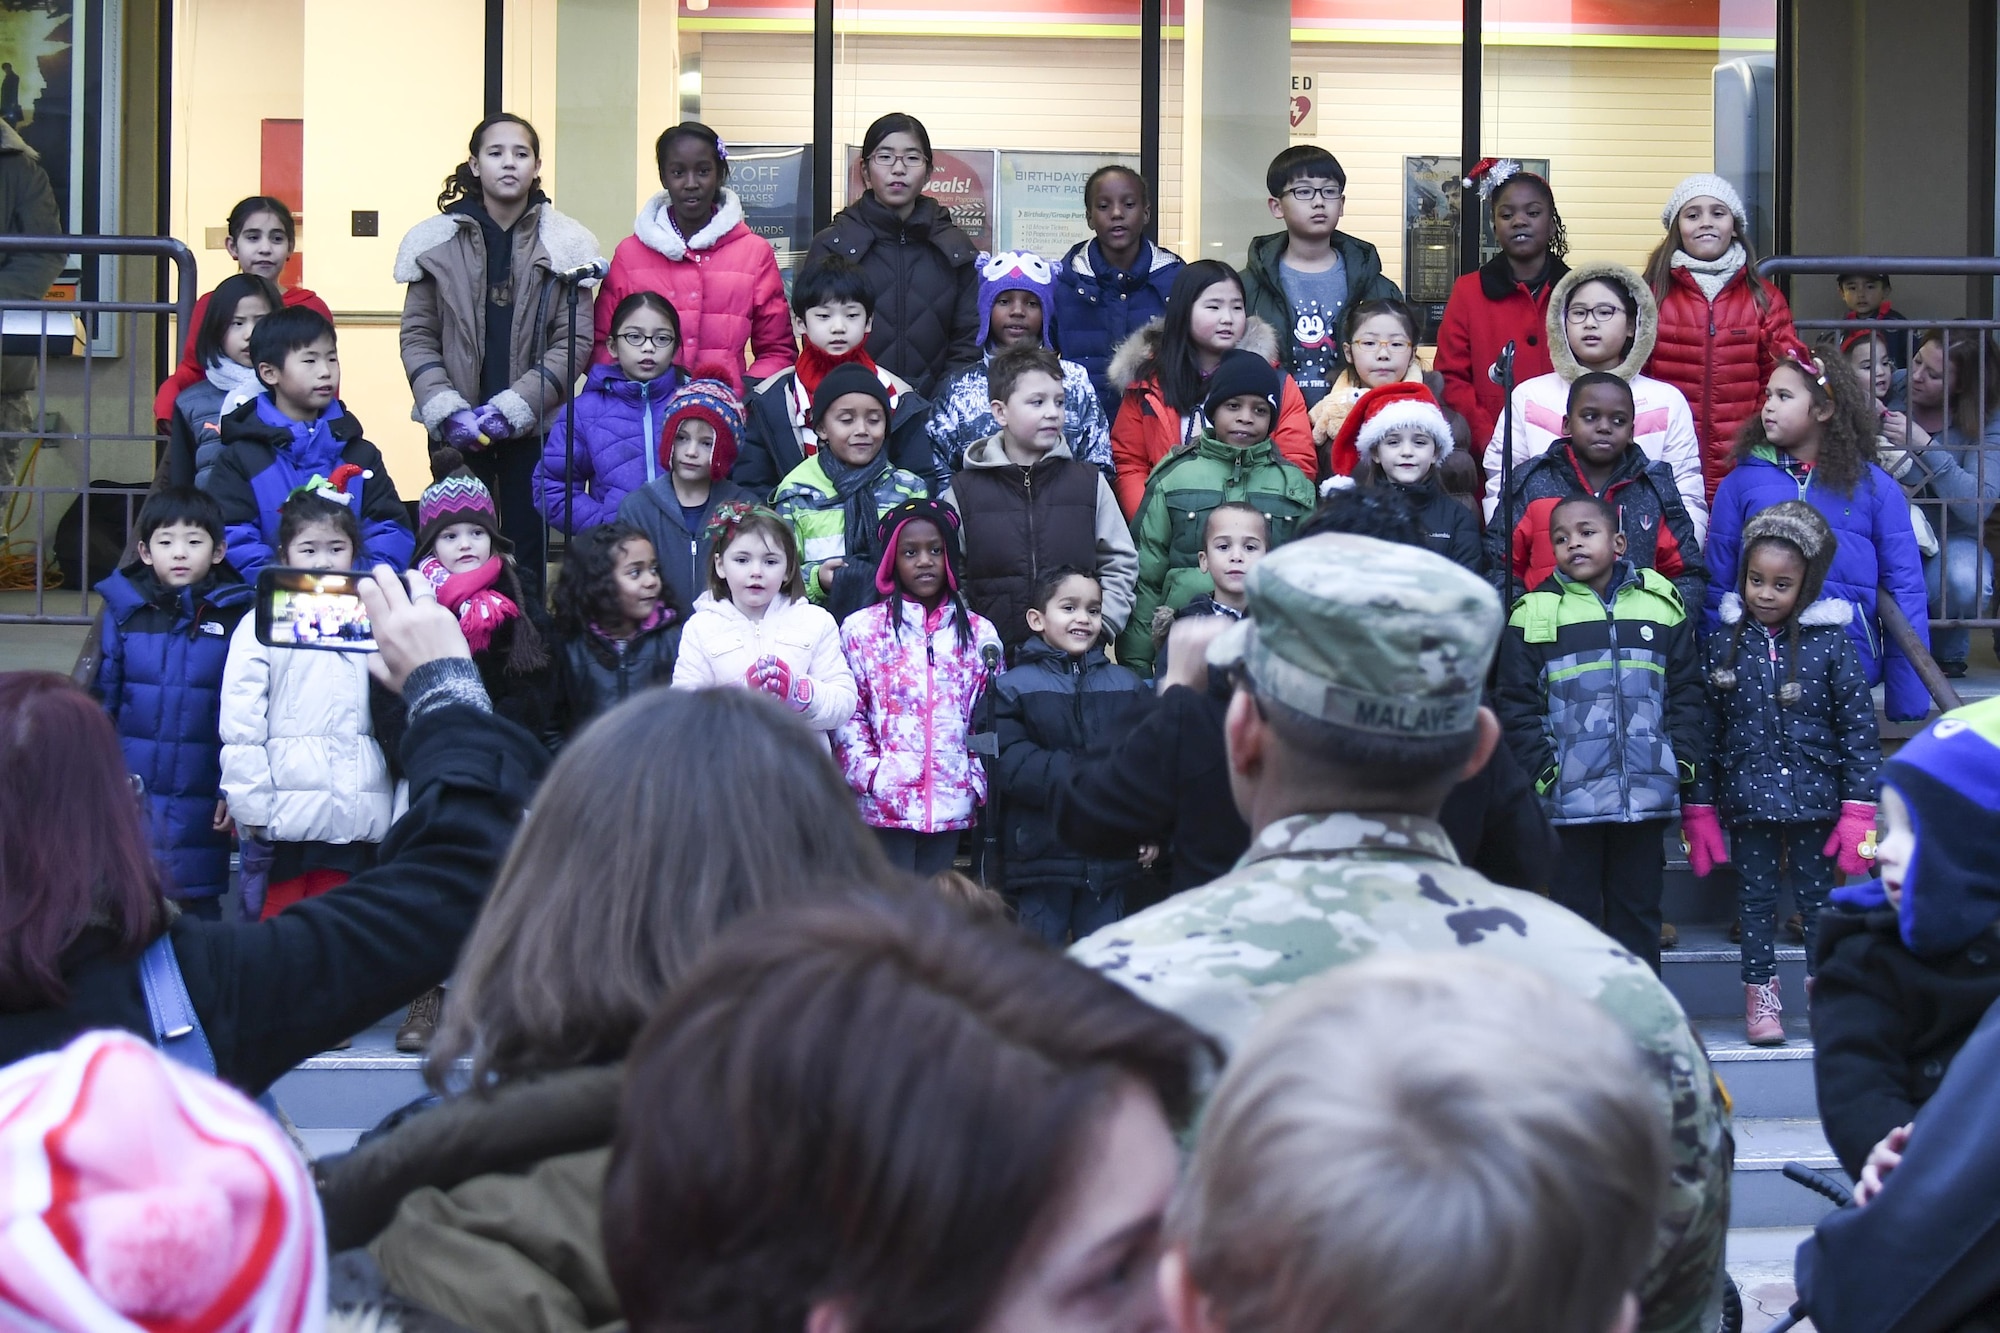 Children from the Osan Chapel Children’s Choir perform Christmas carols for the Christmas tree lighting ceremony at Osan Air Base, Republic of Korea, Dec. 8, 2016. Hundreds of service members and their families gathered in the “Main Square” in front of the base theater to witness the lighting of the tree. (U.S. Air Force photo by Tech. Sgt. Rasheen Douglas)